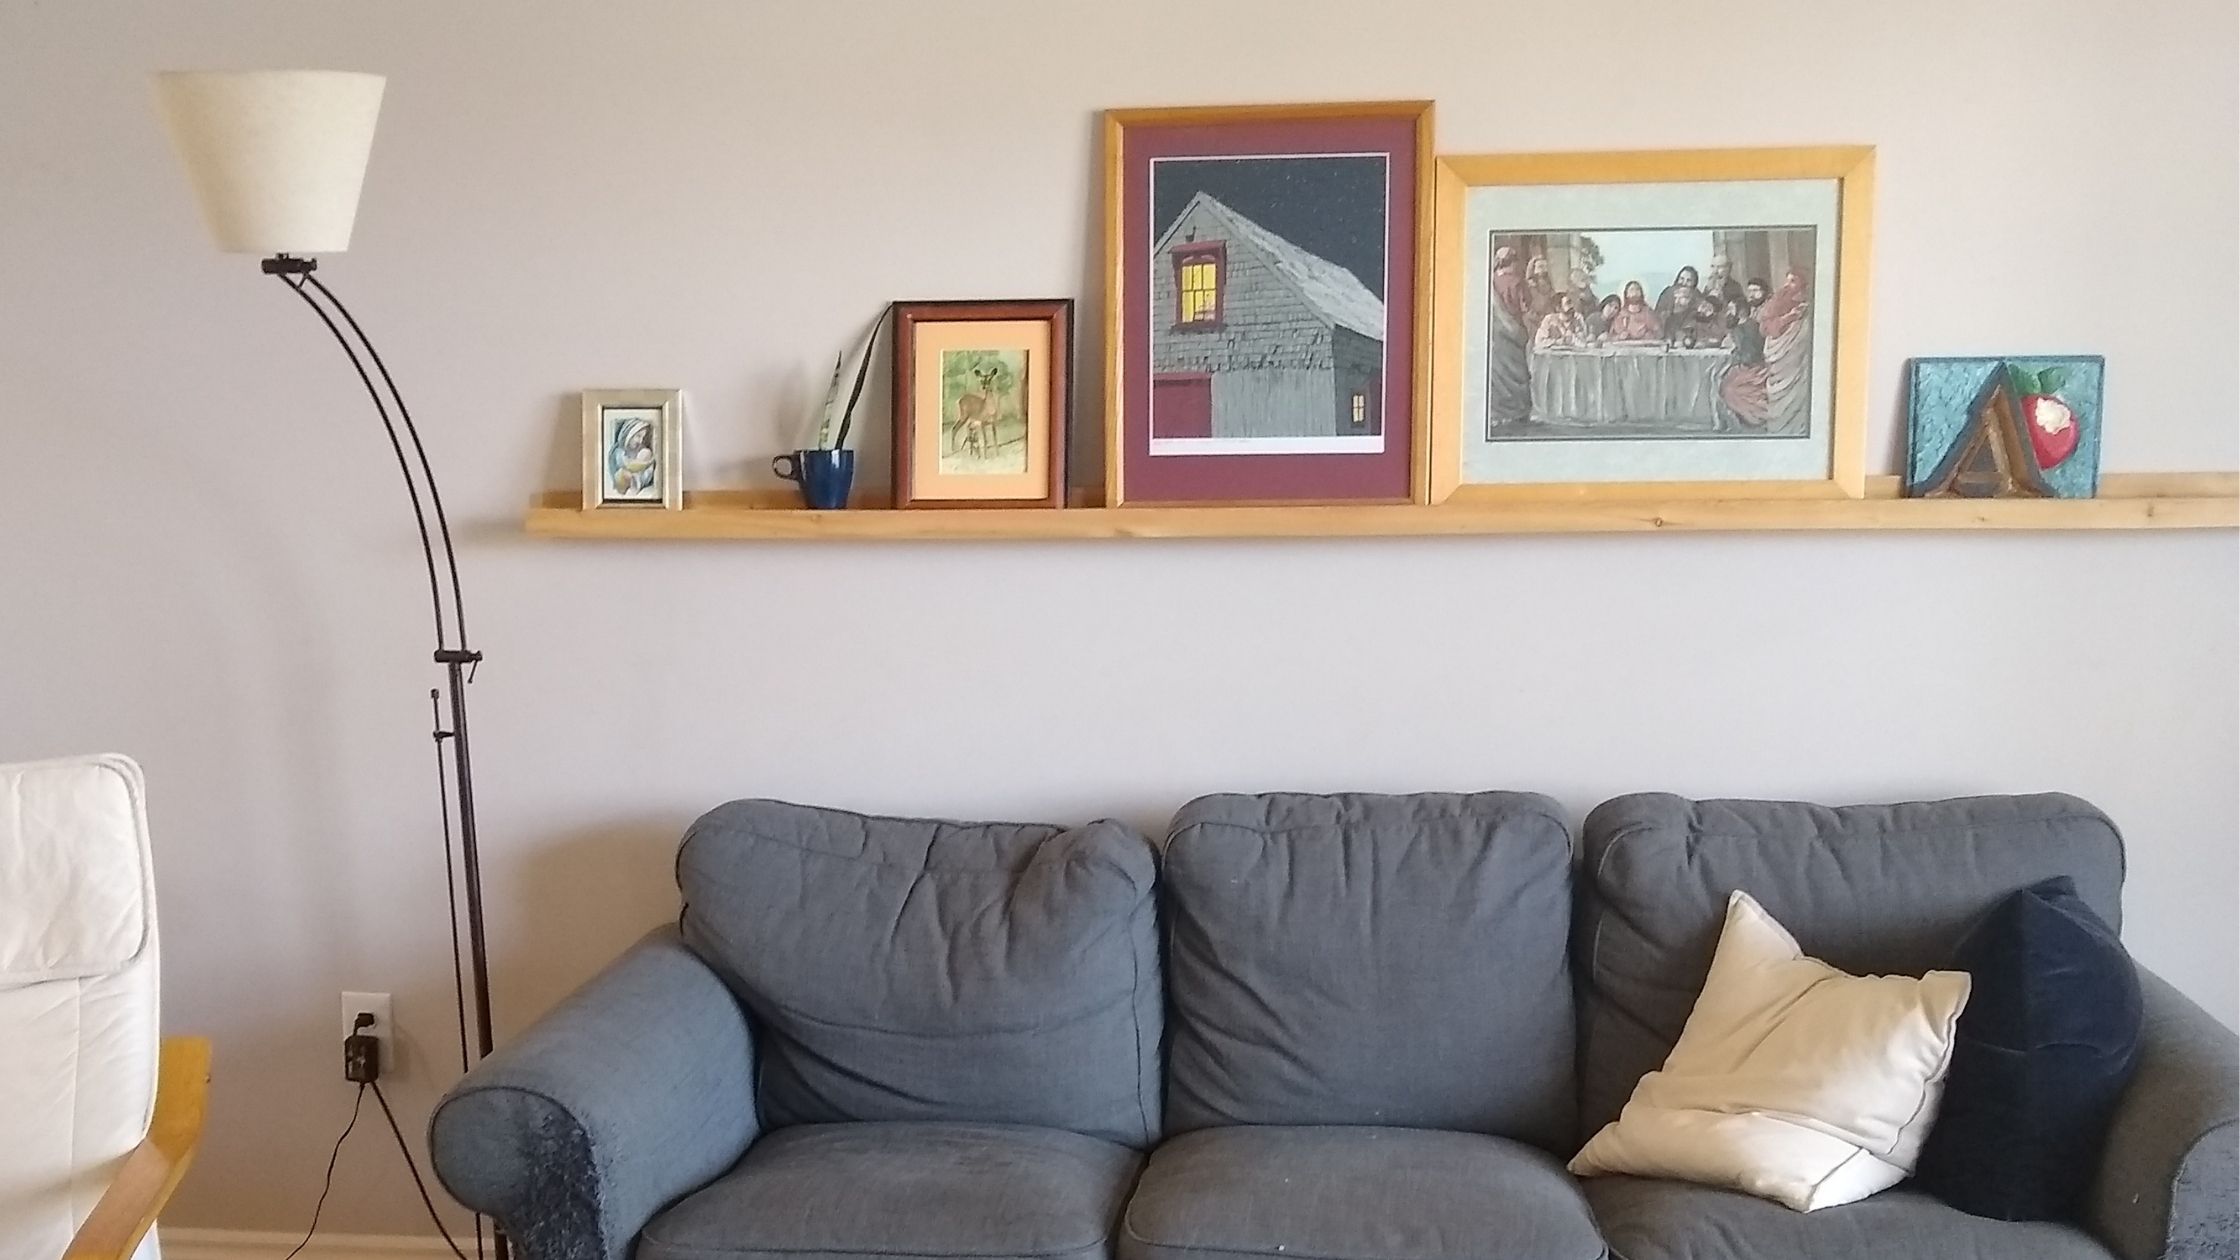 A picture of our couch and pictures above it on the wall.